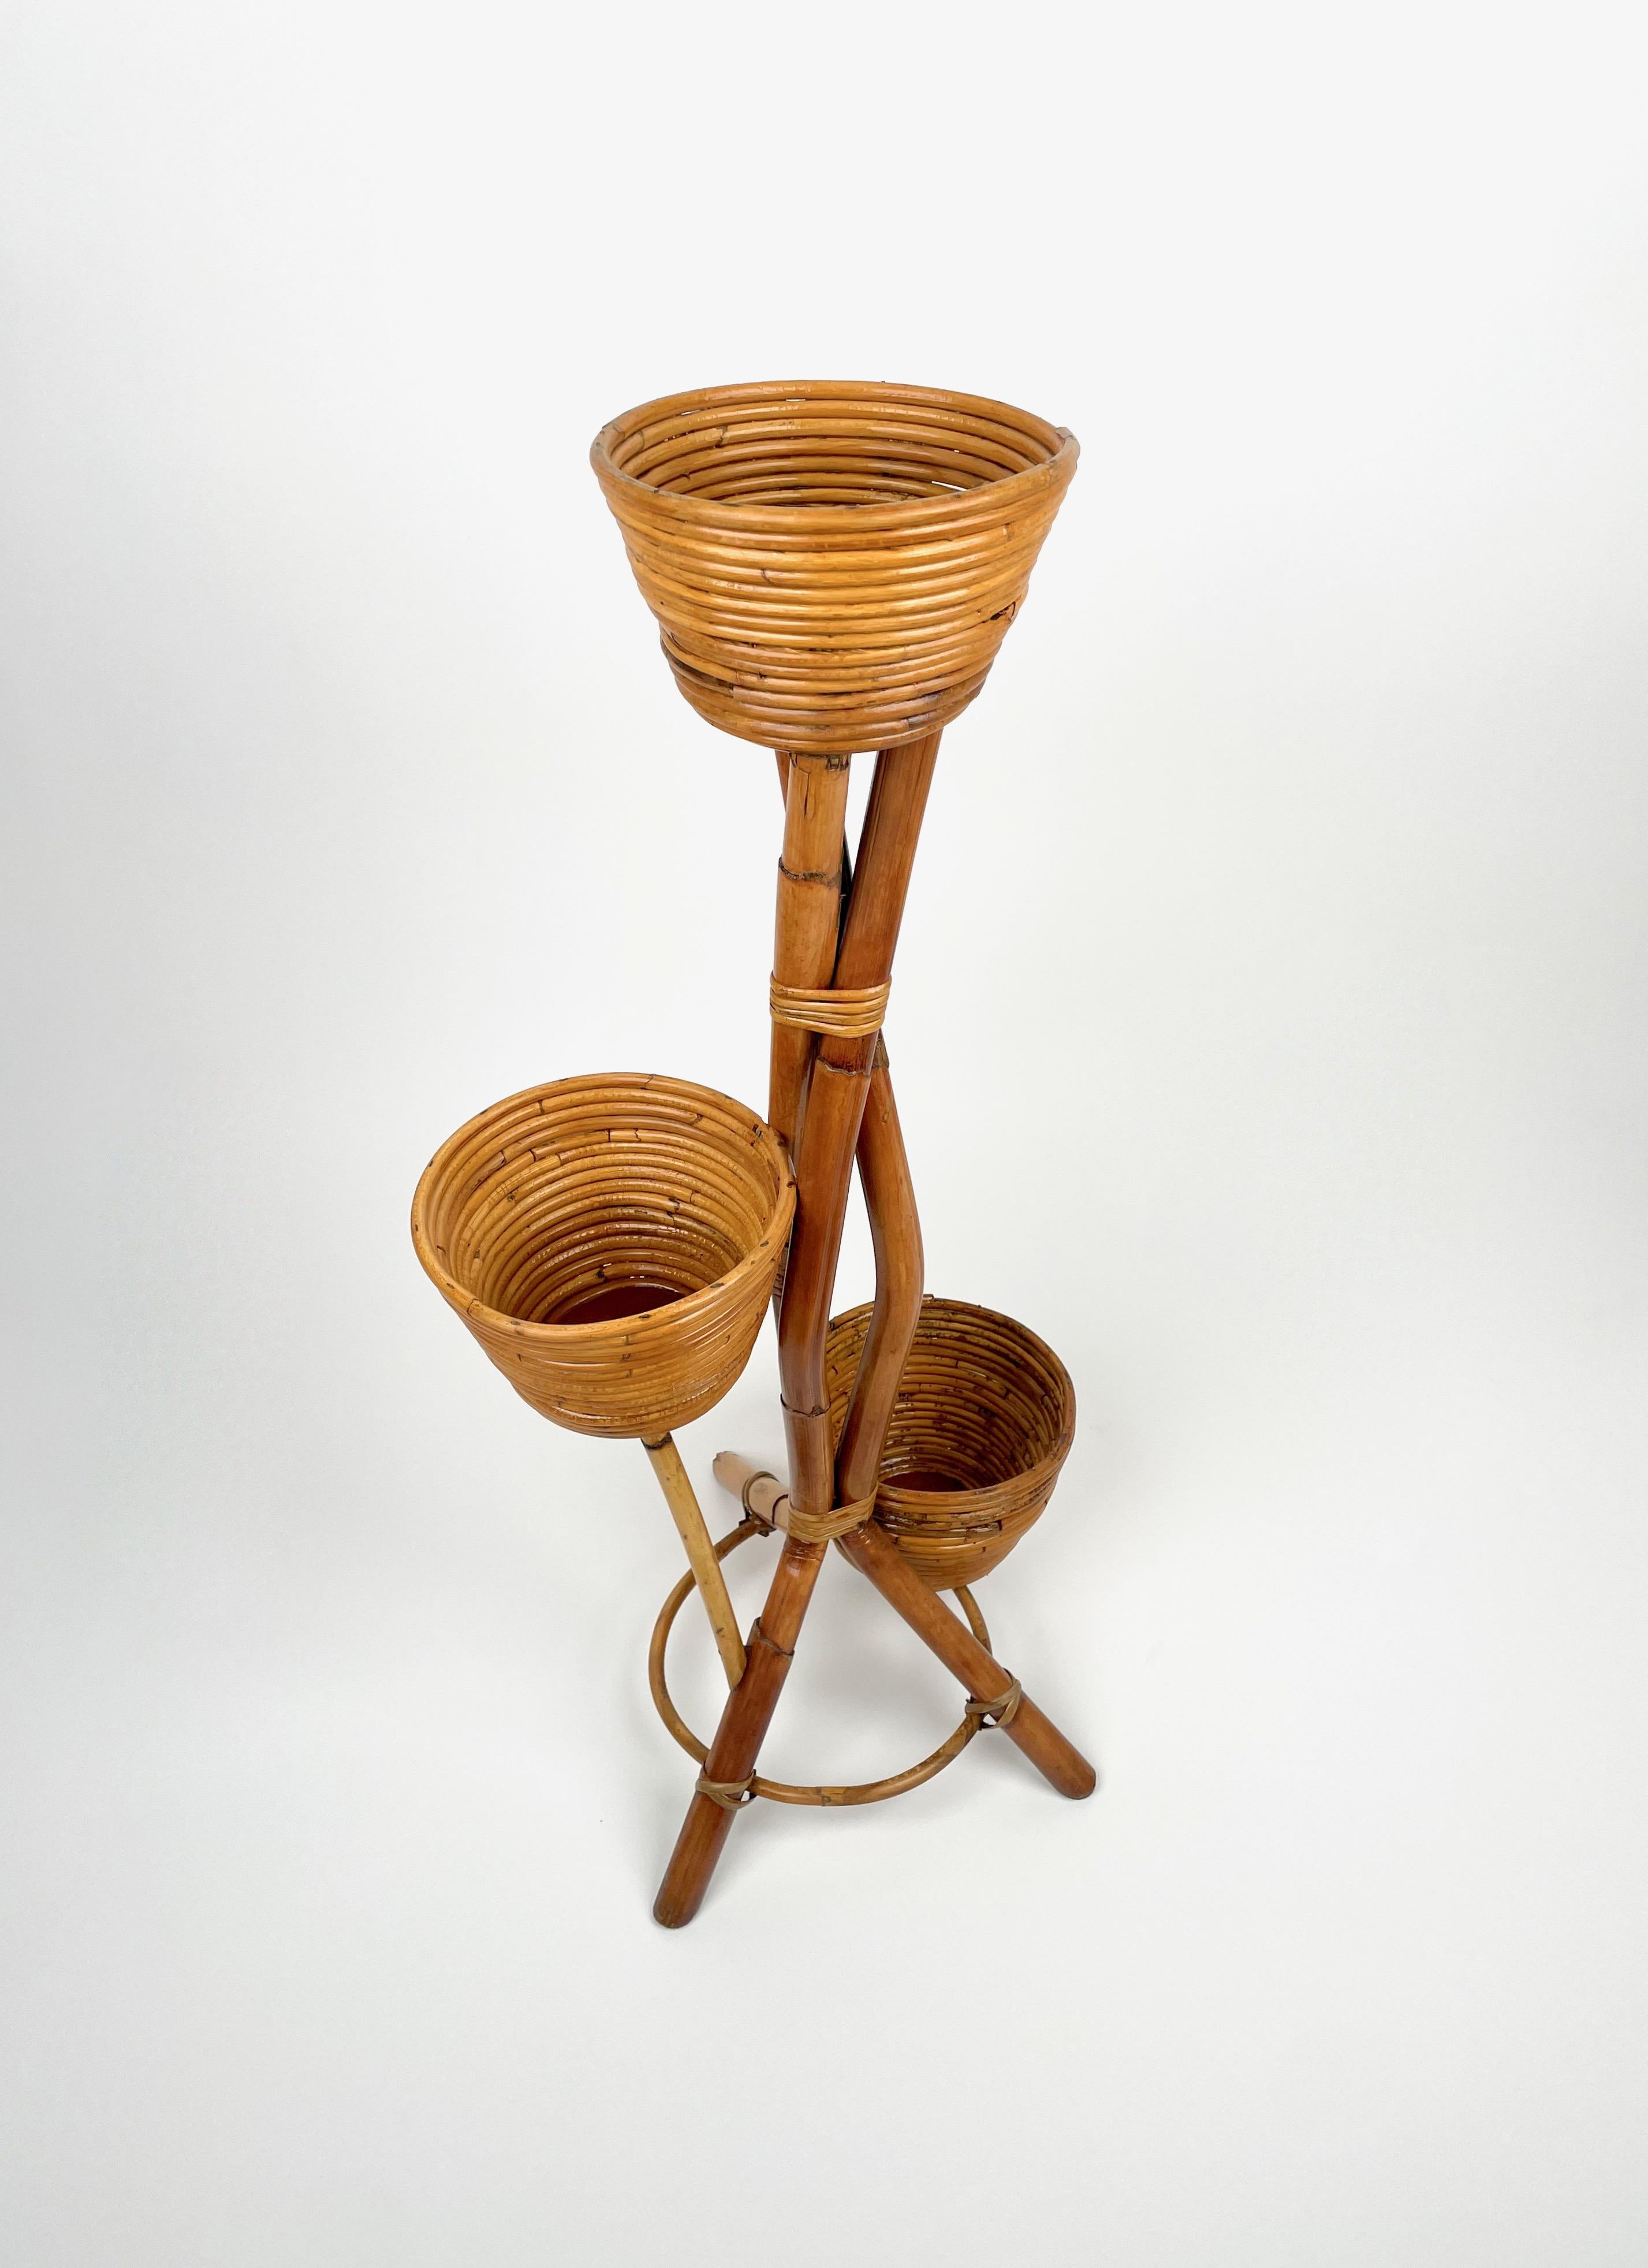 Mid-Century Modern Rattan and Bamboo Flowers Stands or Plants Holders, Italy 1960s